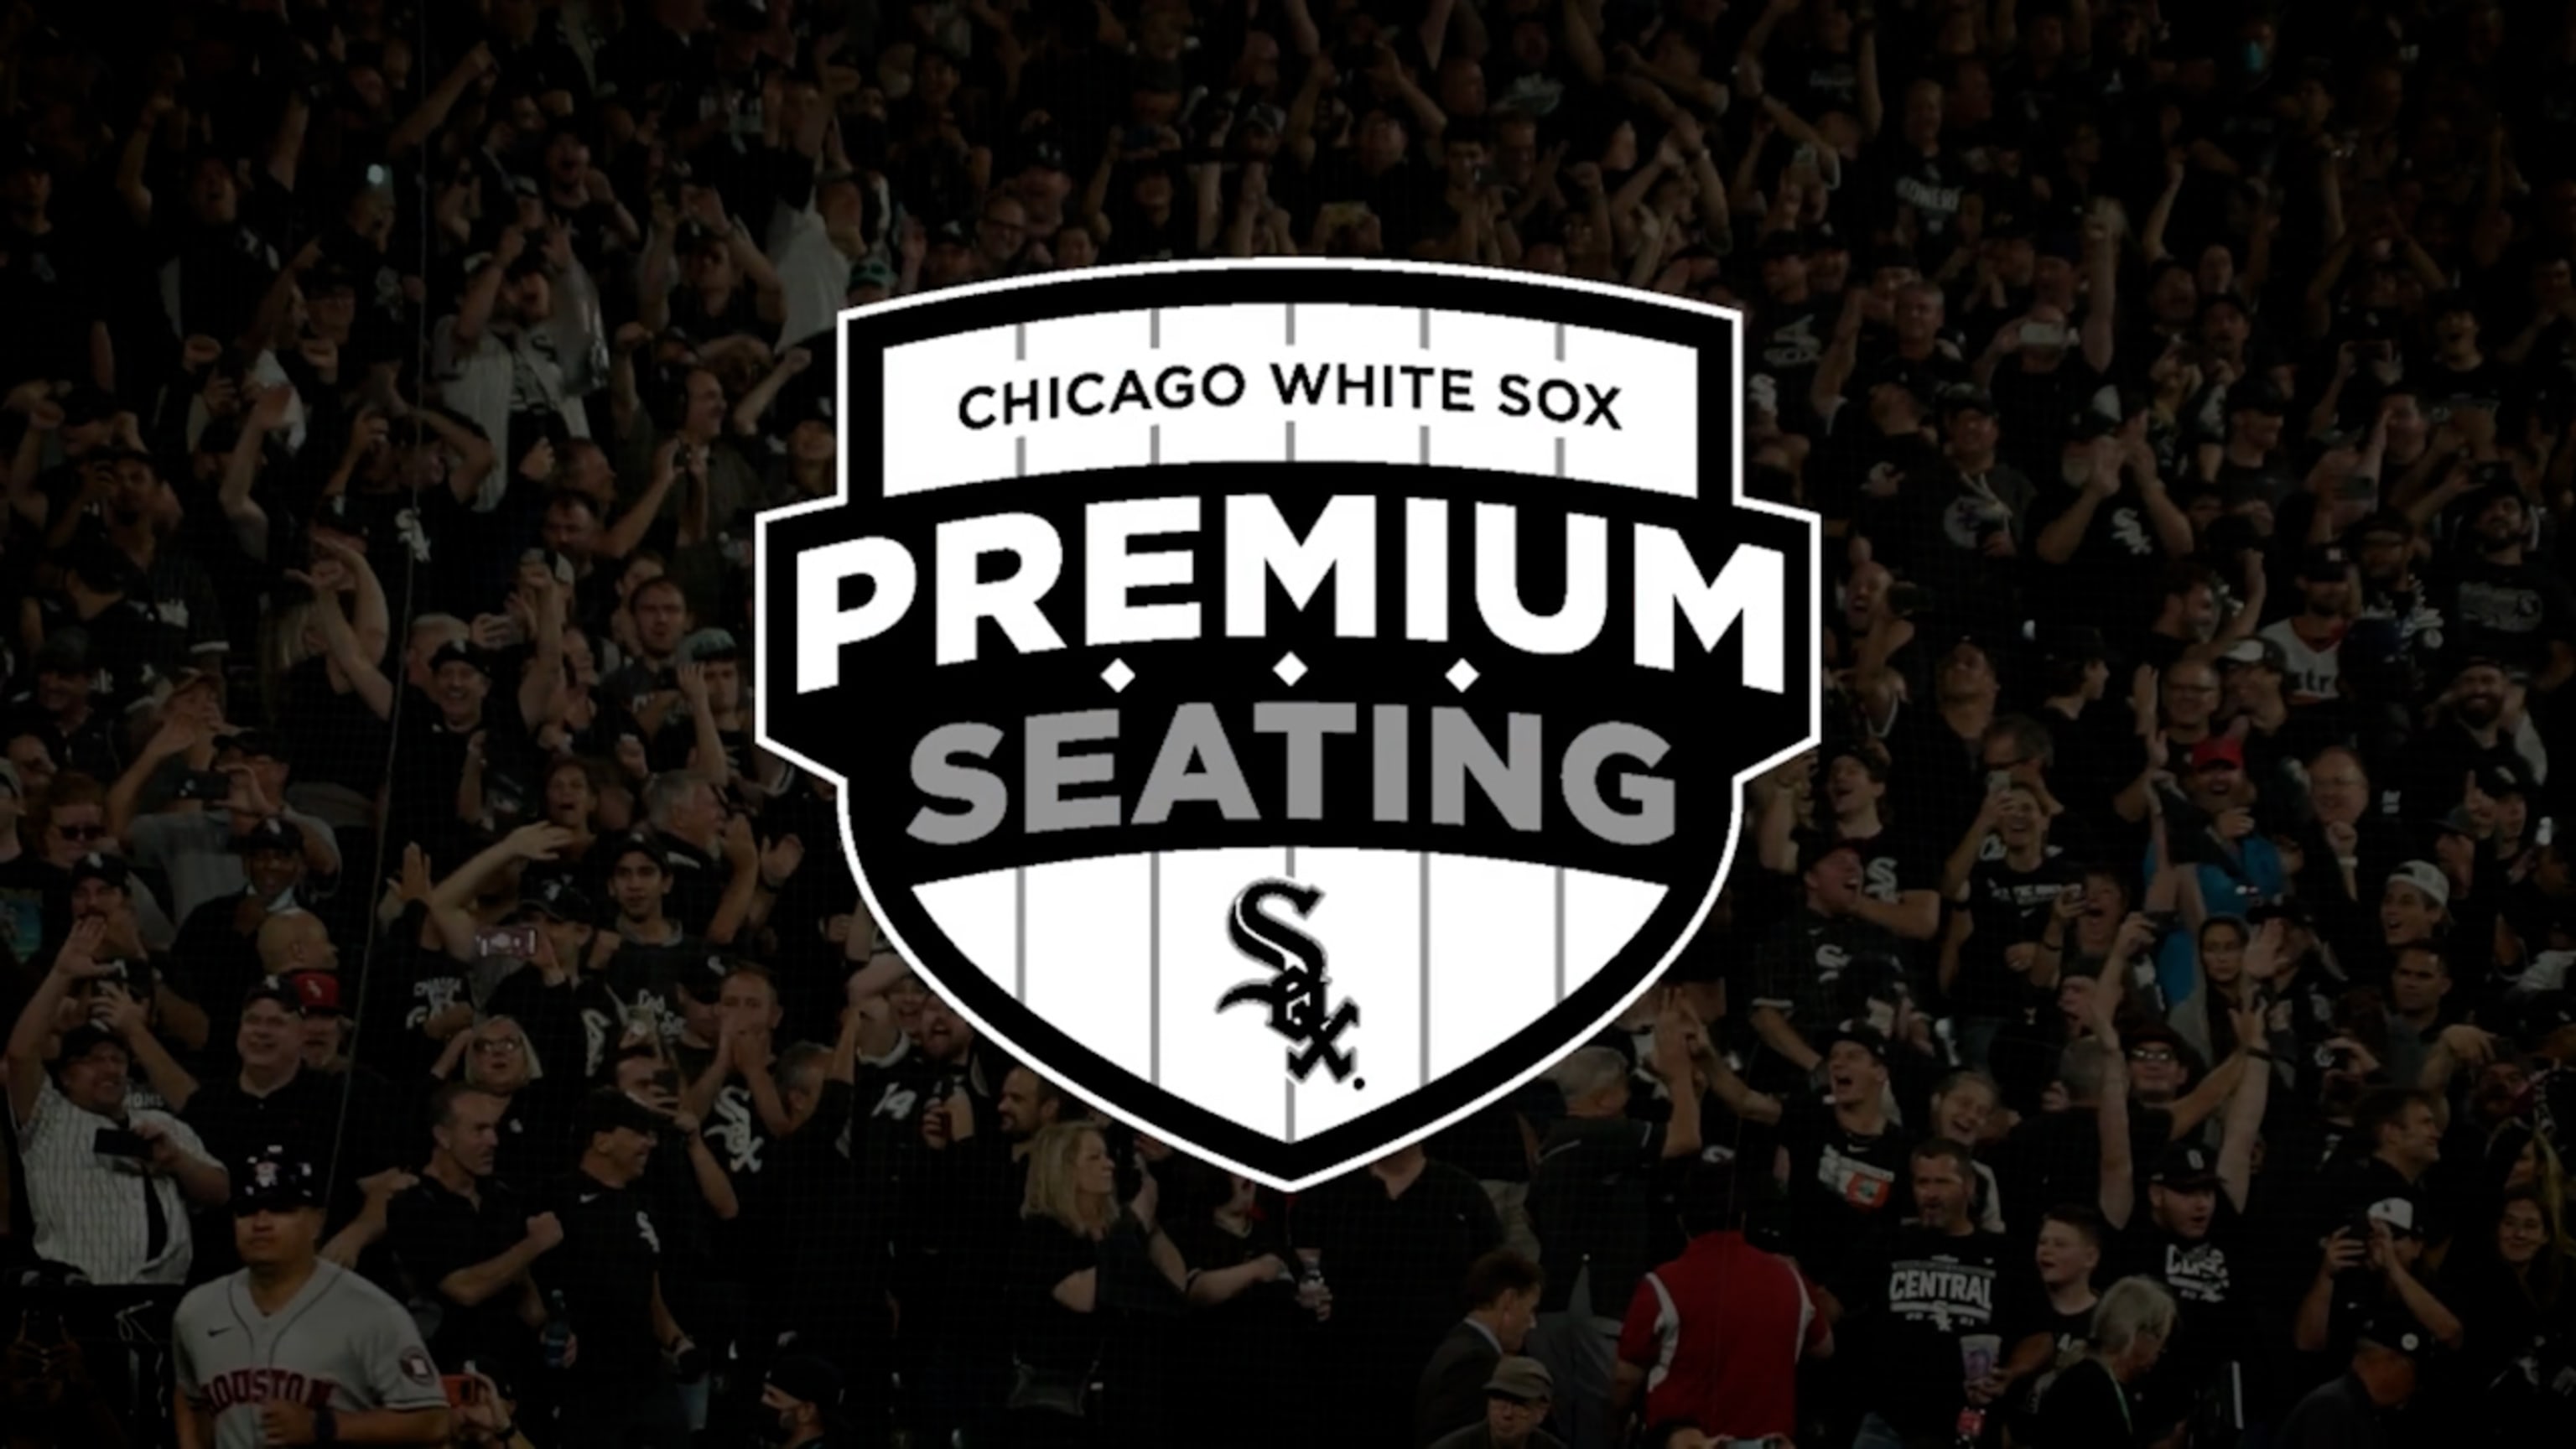 Chicago White Sox Fans, the 2008 Blackout Game, and the Power of